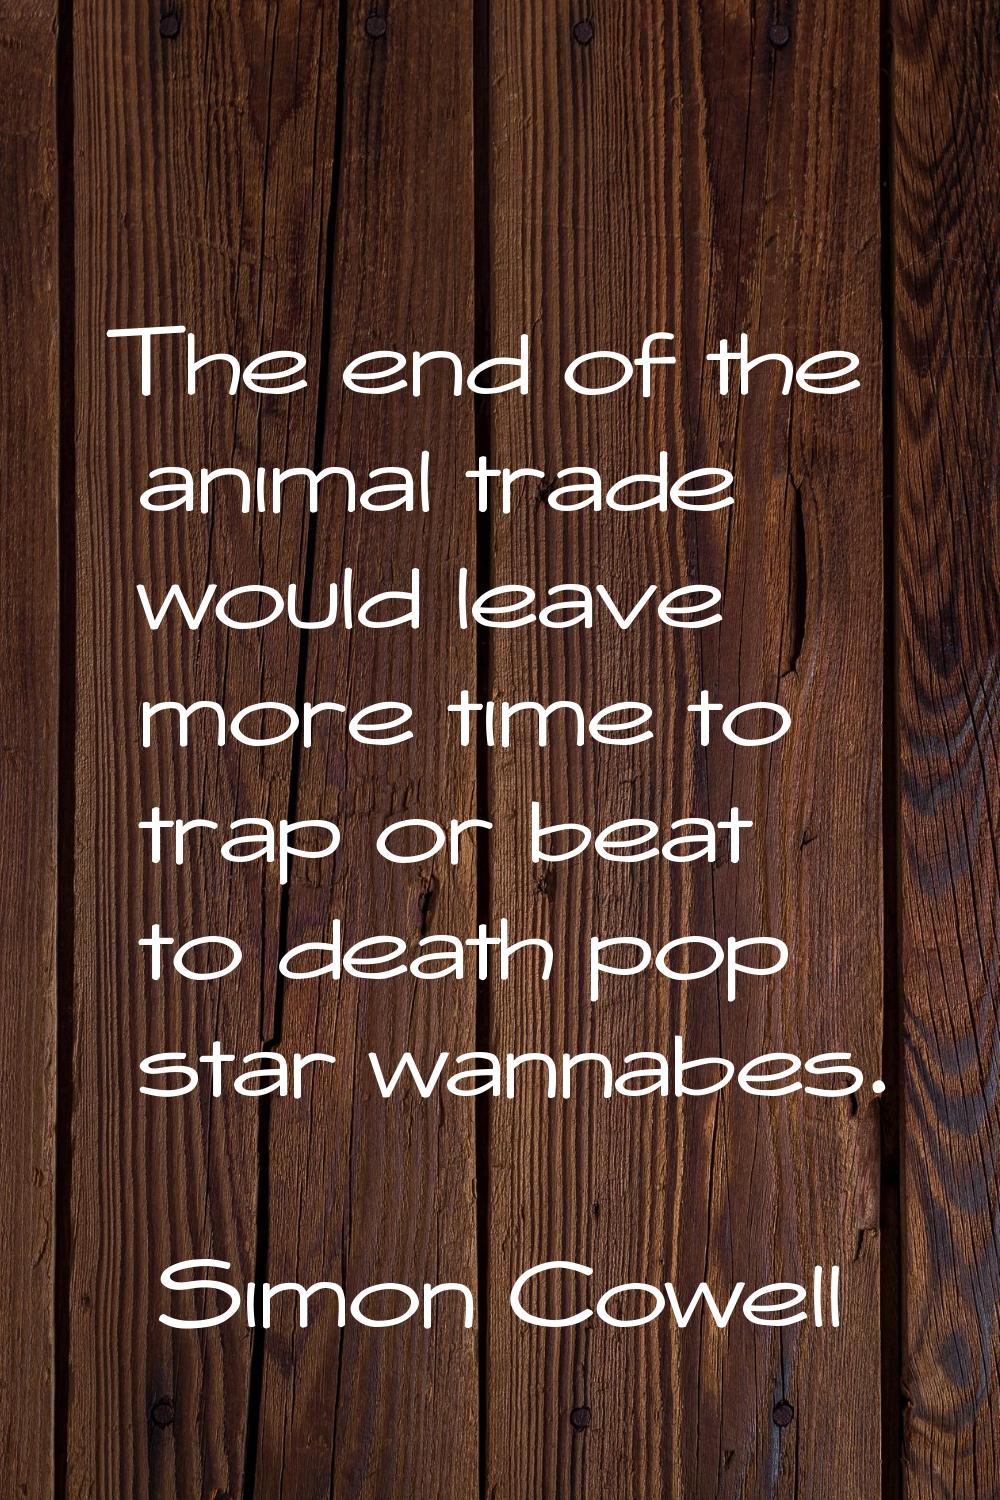 The end of the animal trade would leave more time to trap or beat to death pop star wannabes.